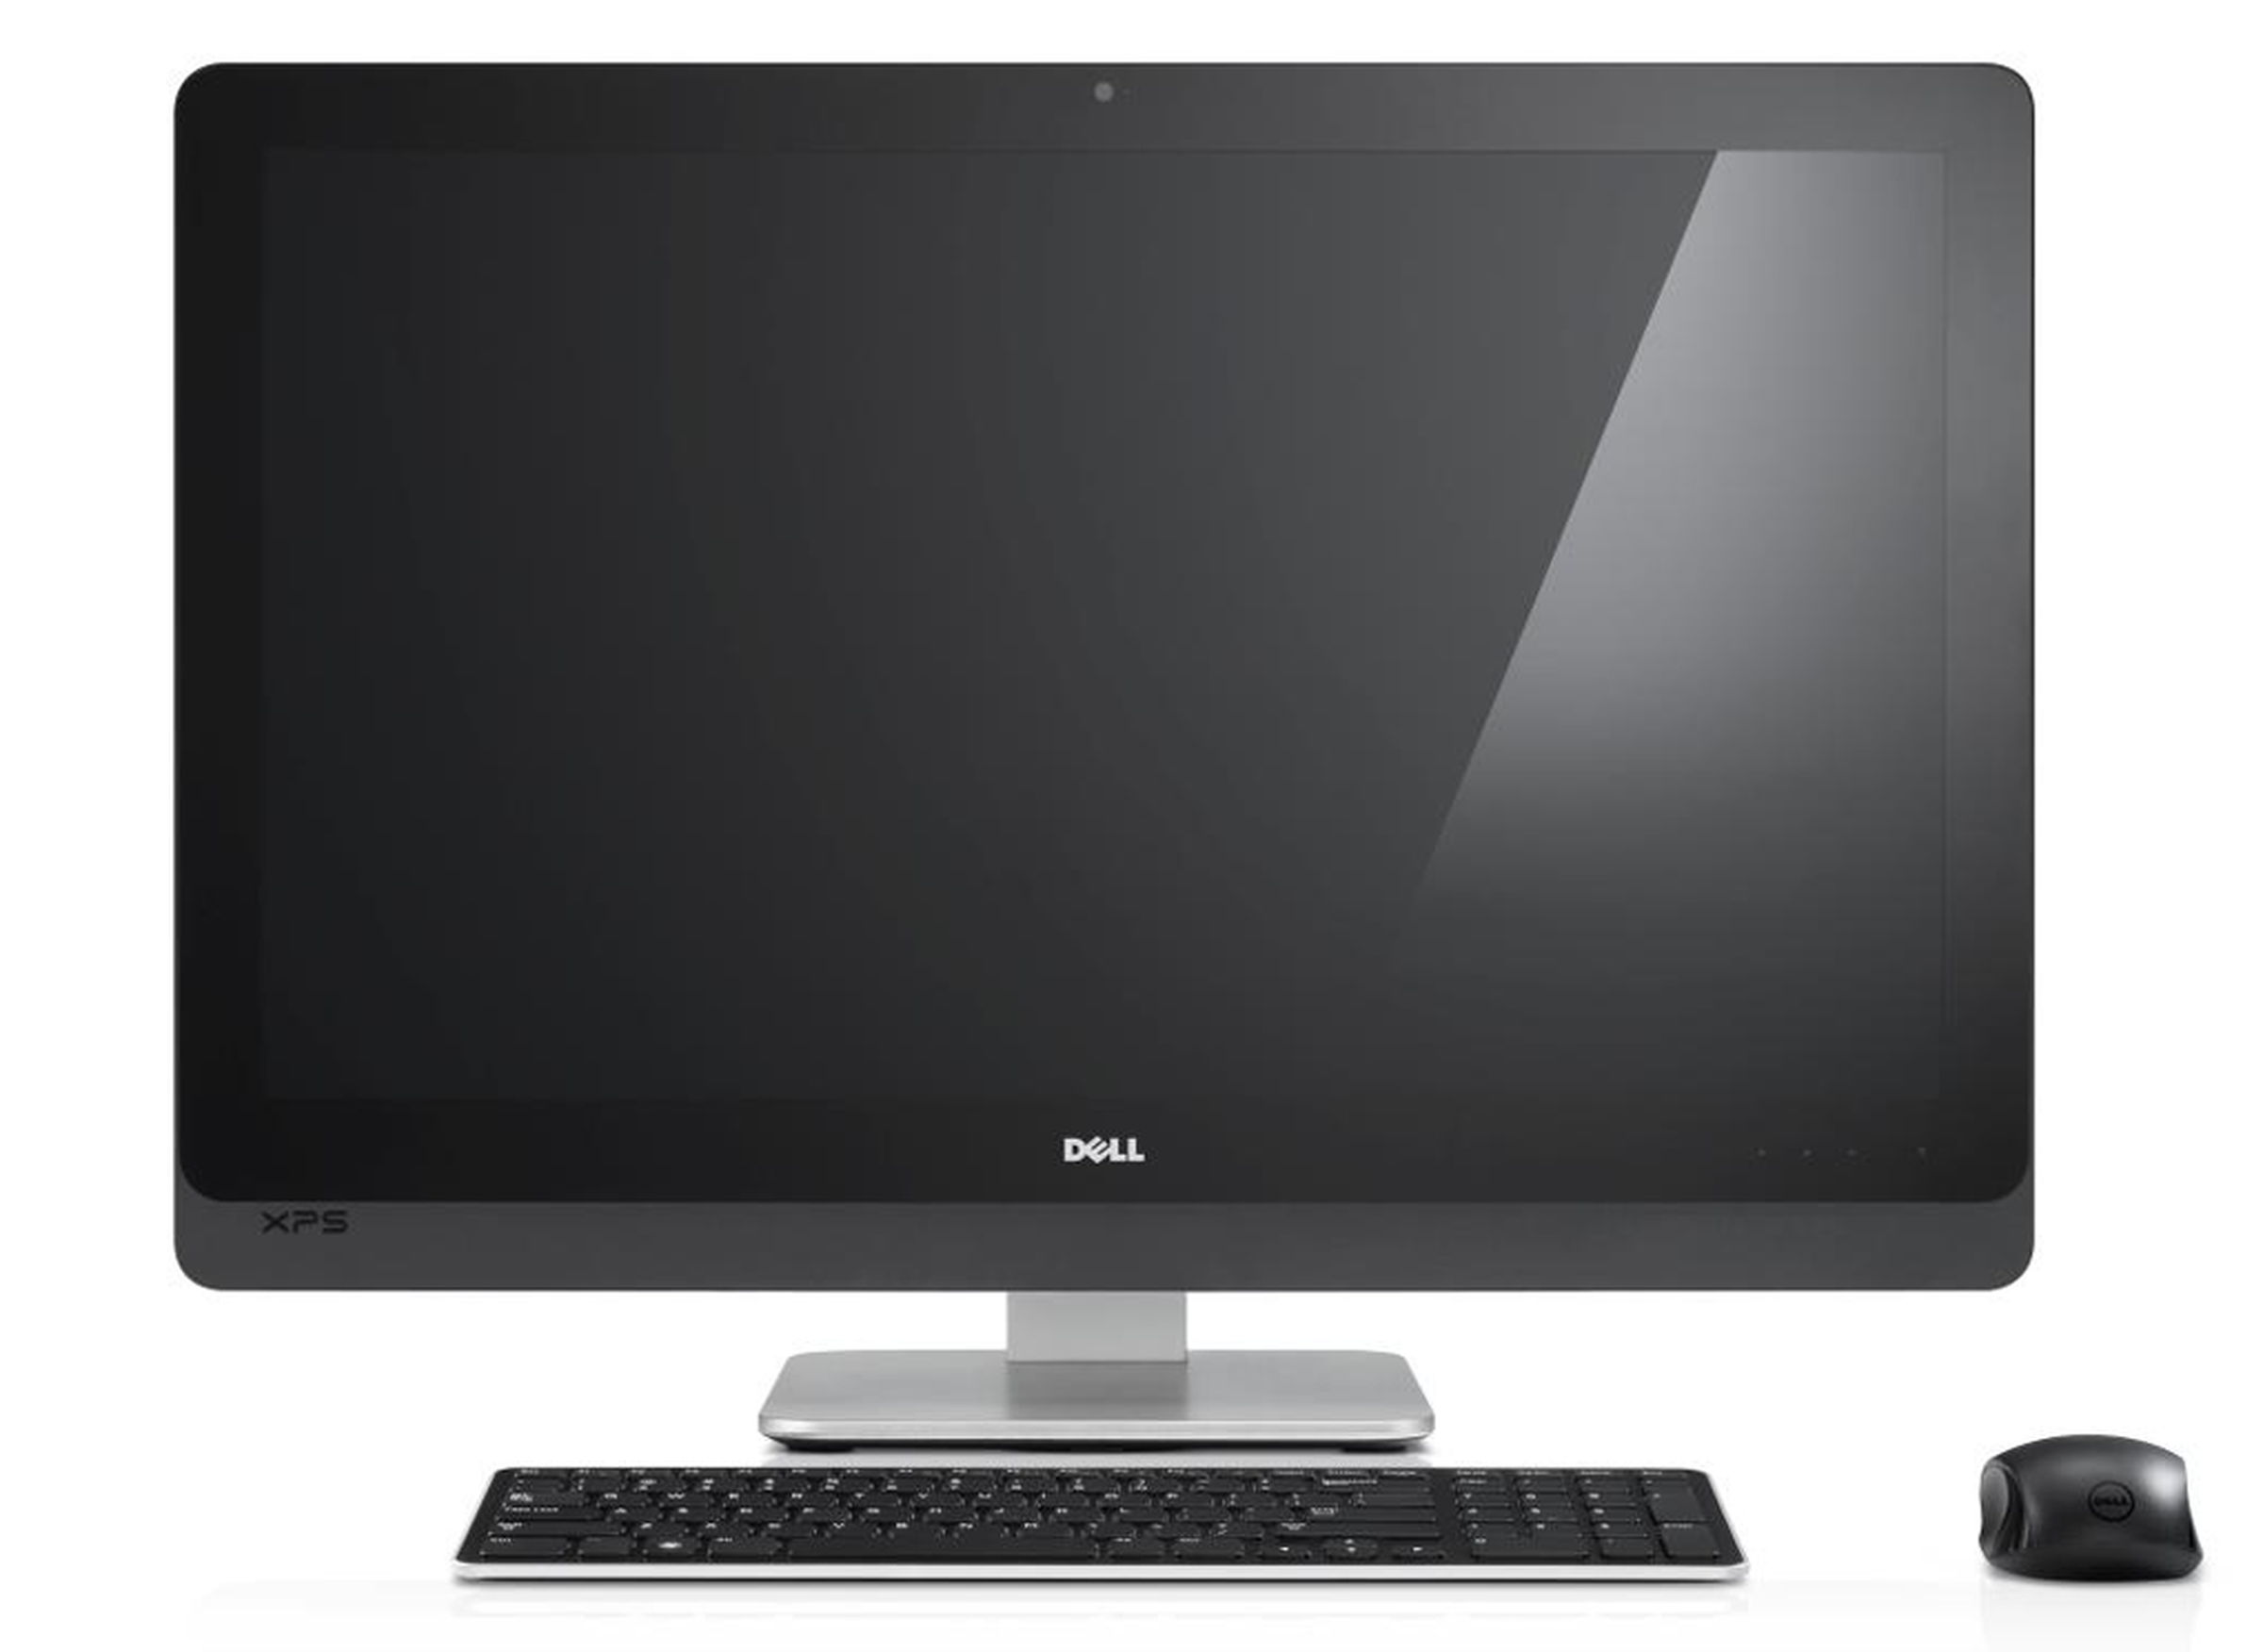 Dell XPS One 27 and Inspiron One all-in-one press photos